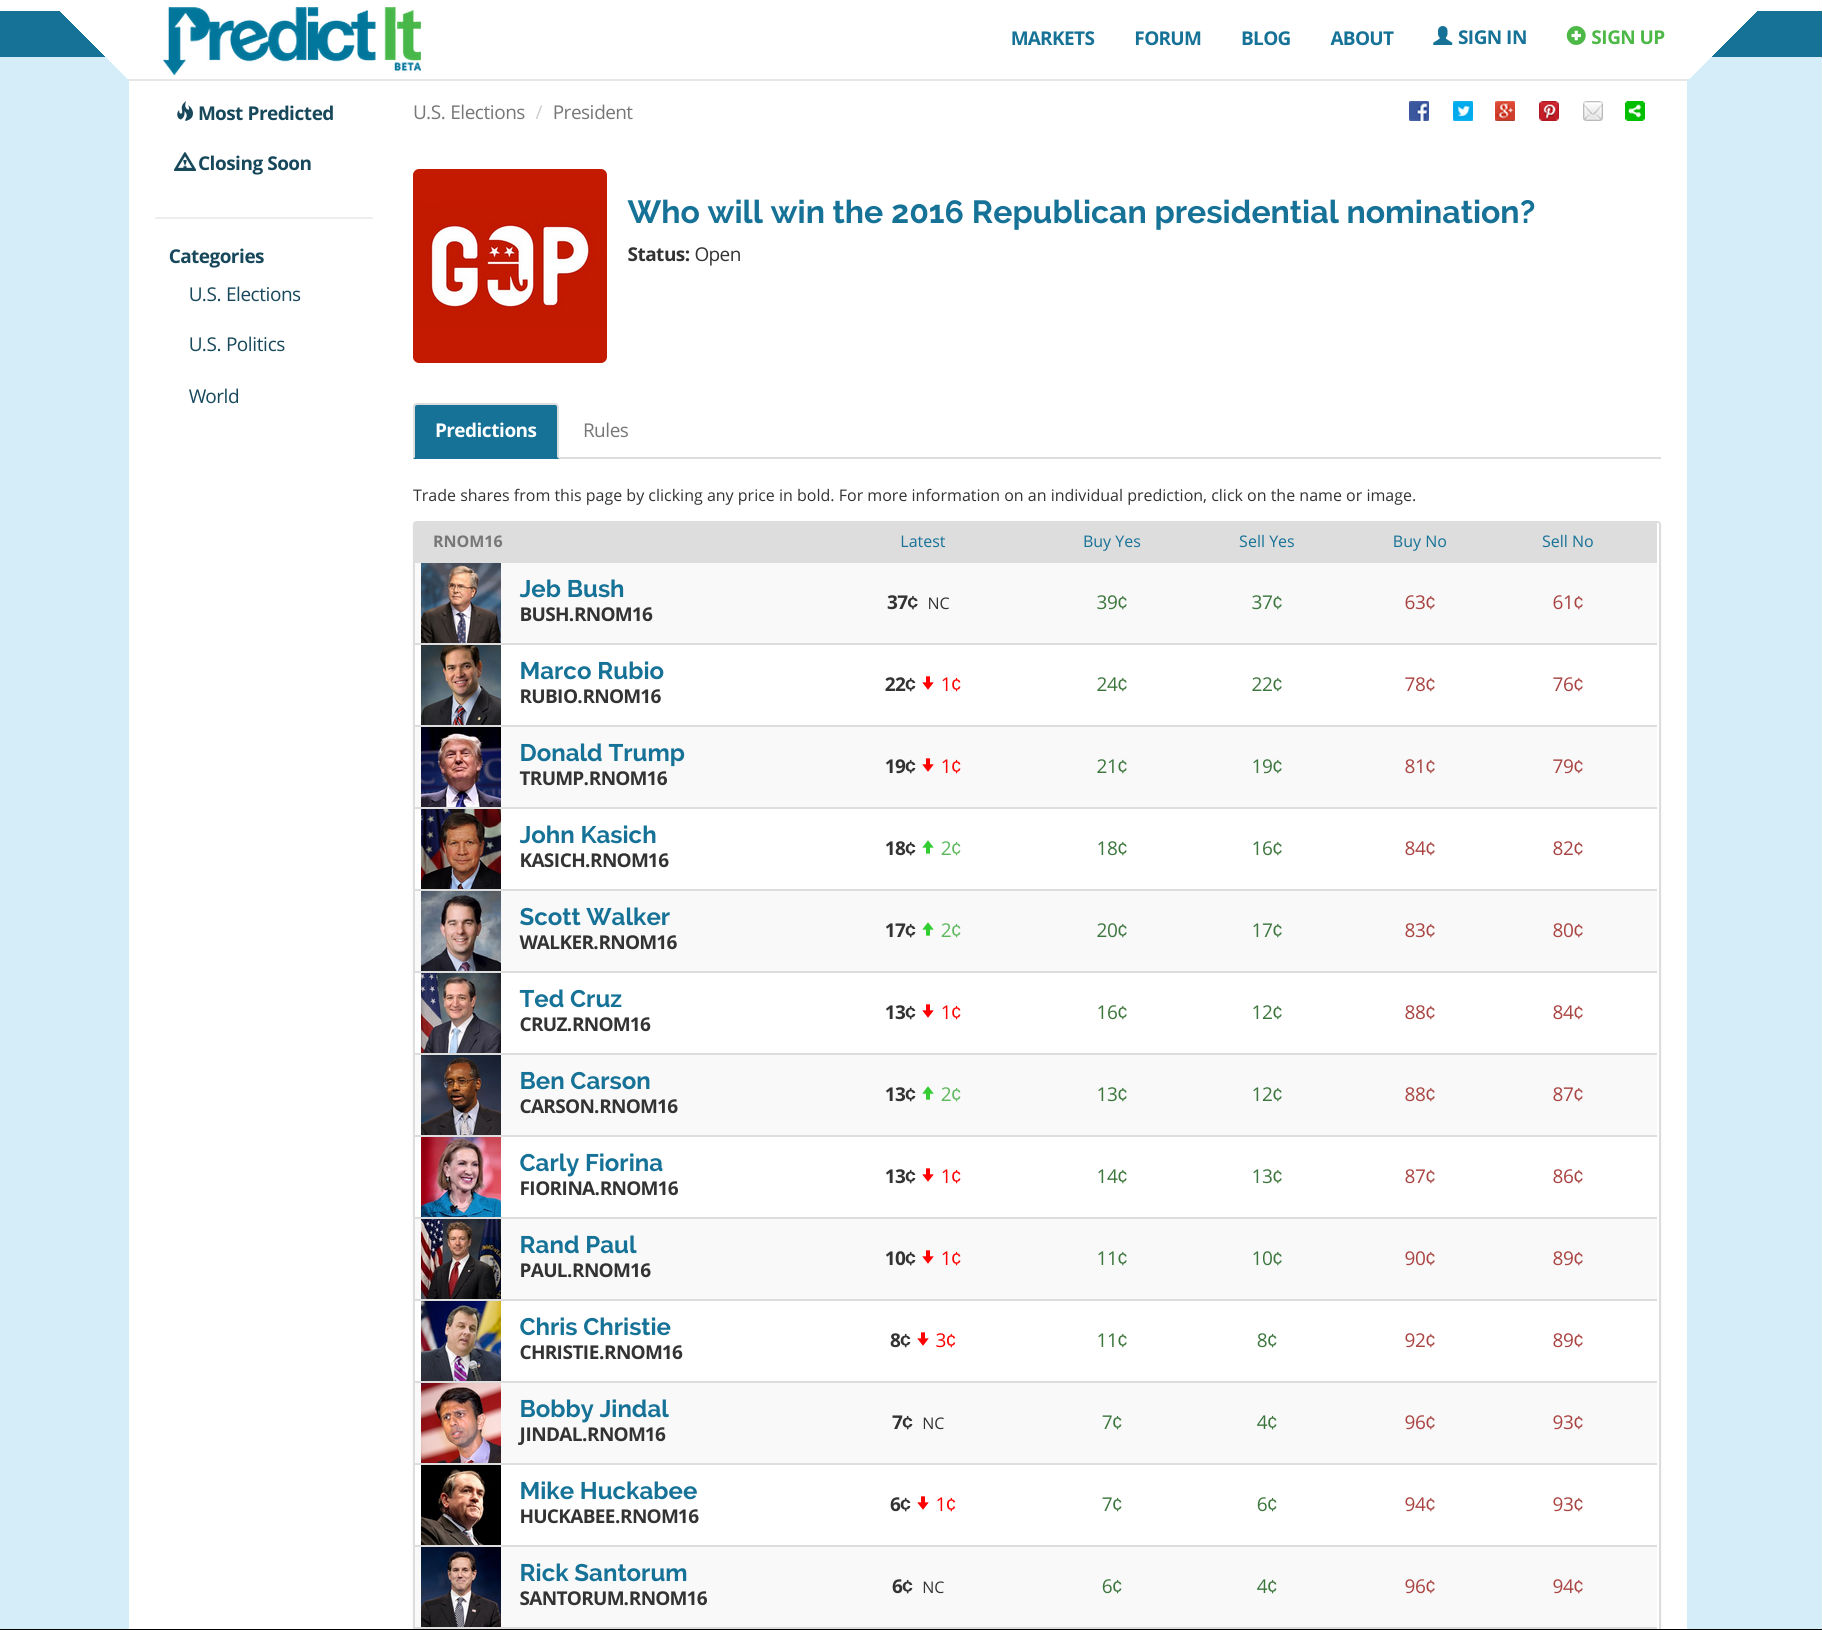 The market in "Who will win the 2016 Republican presidential nomination?", displaying thirteen leading candidates.